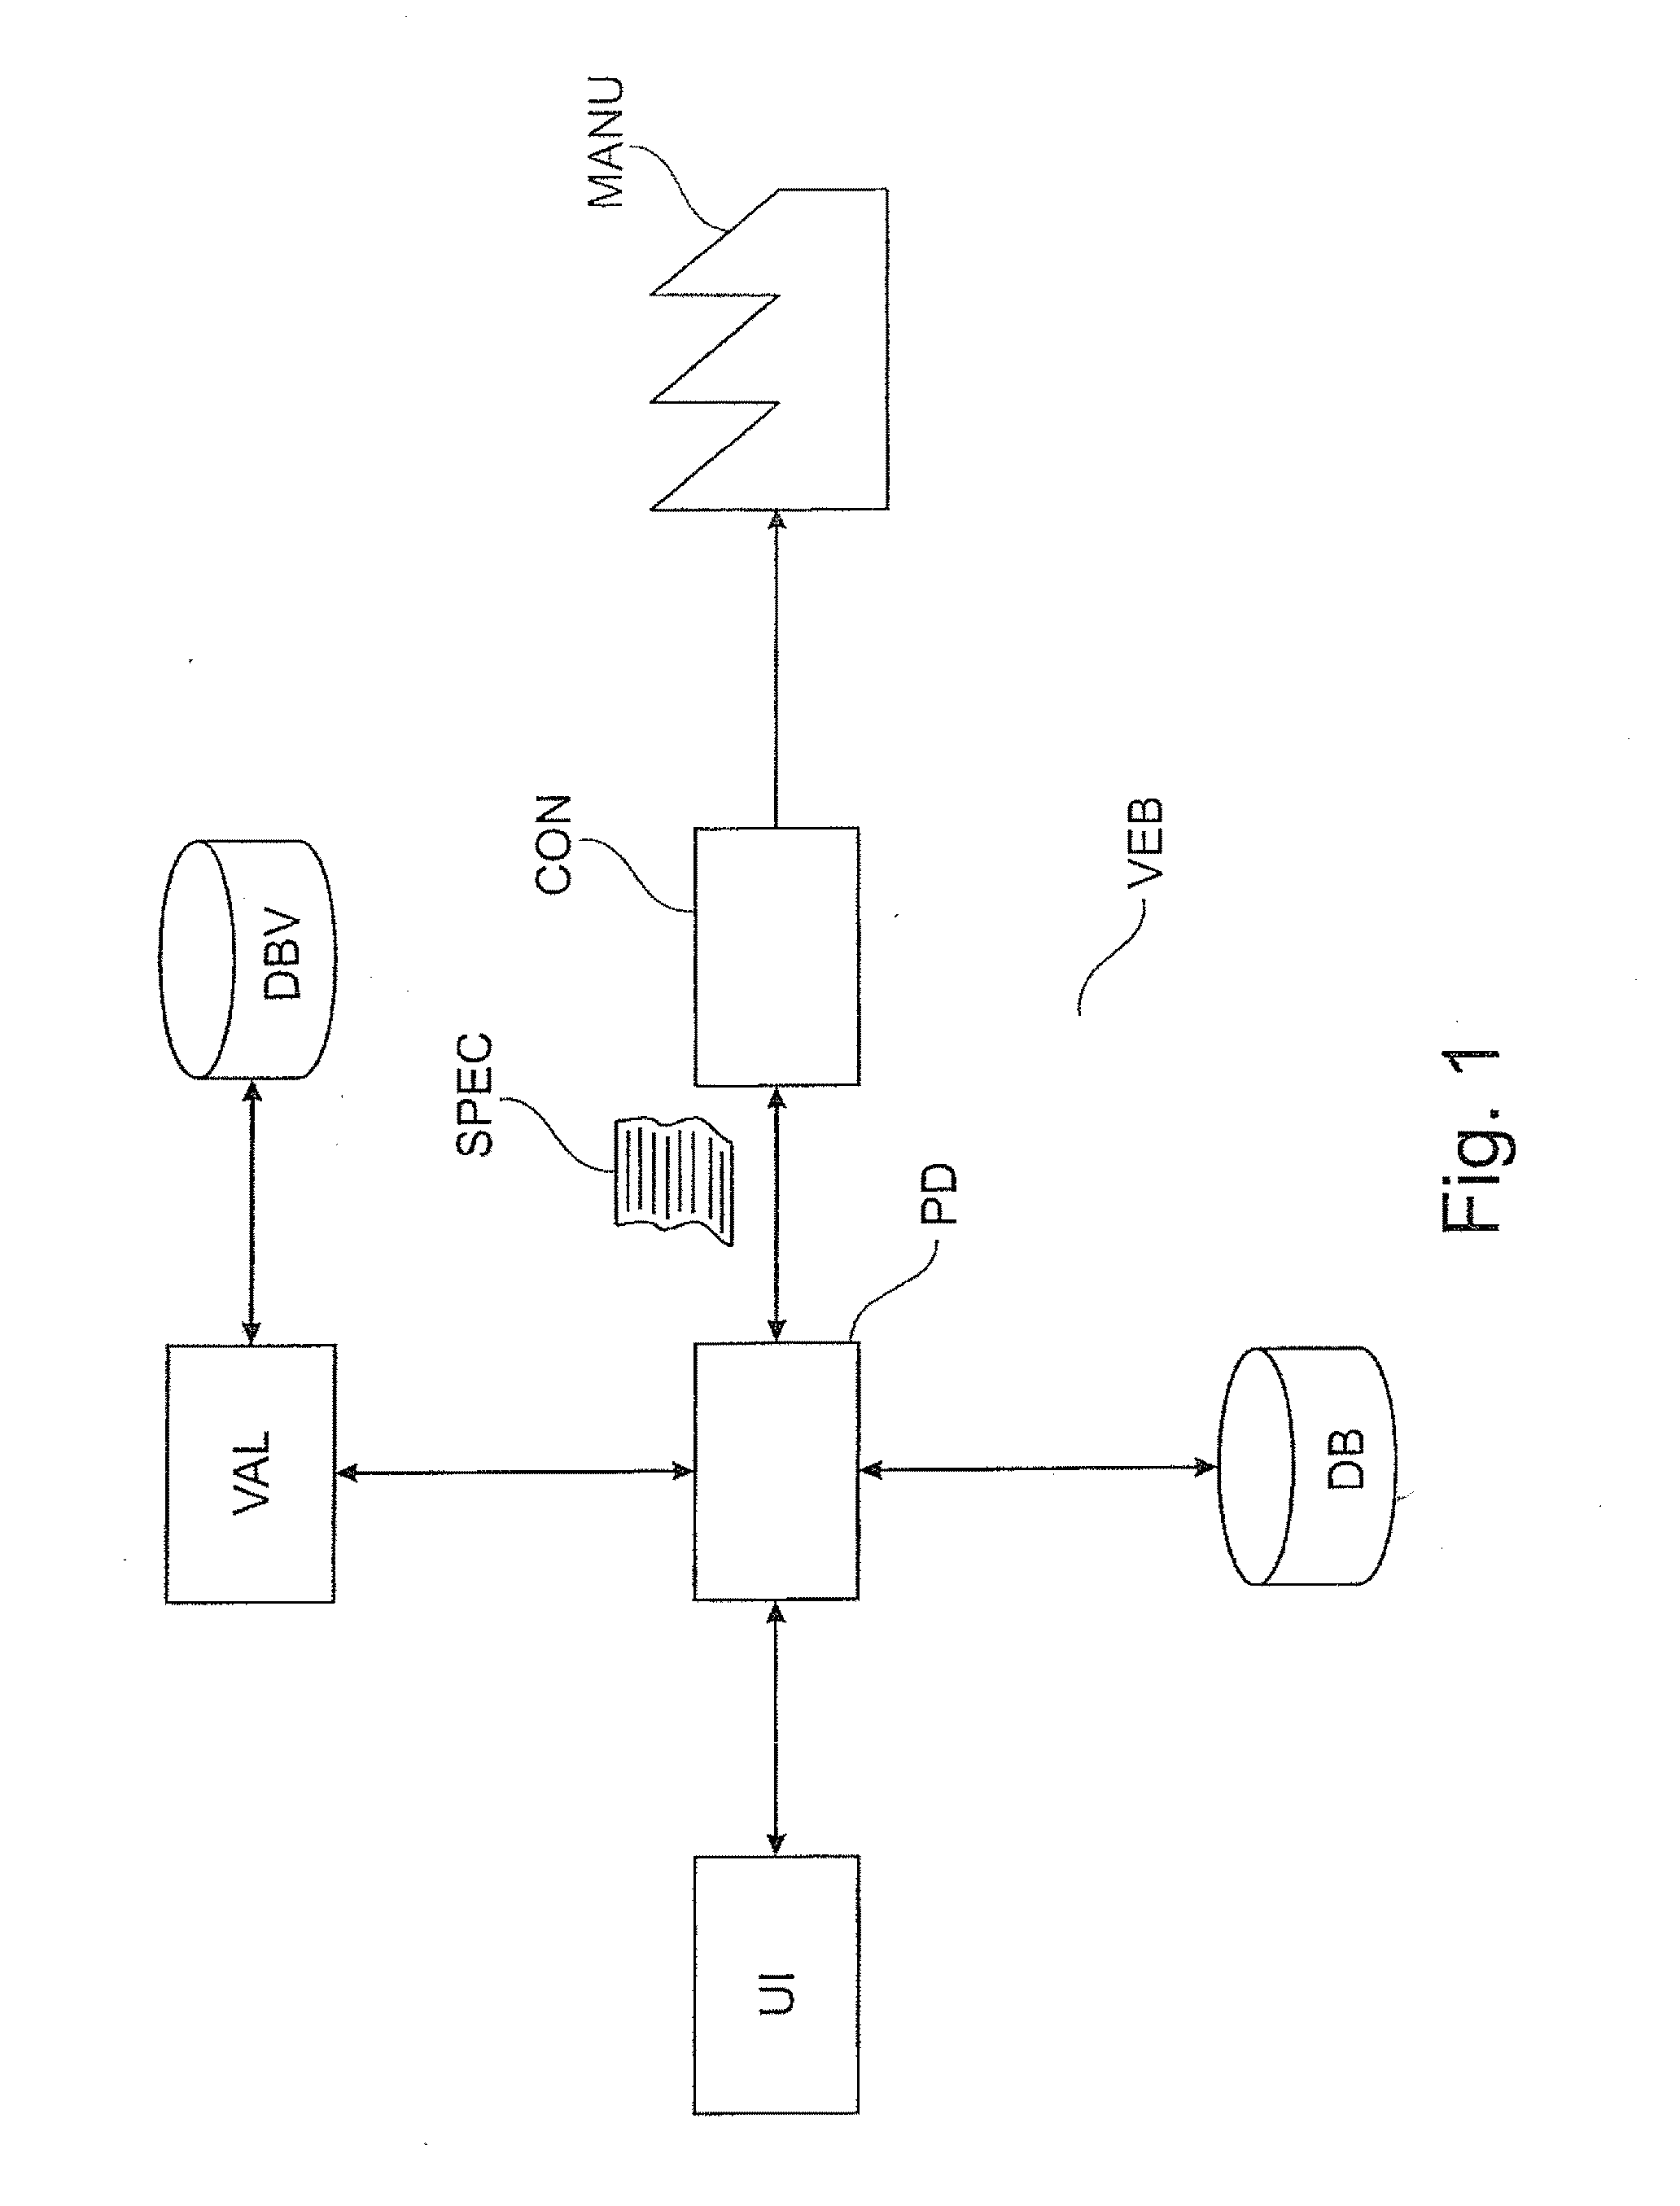 Method for configuration and/or equipment of a vehicle cabin, in particular of an aircraft